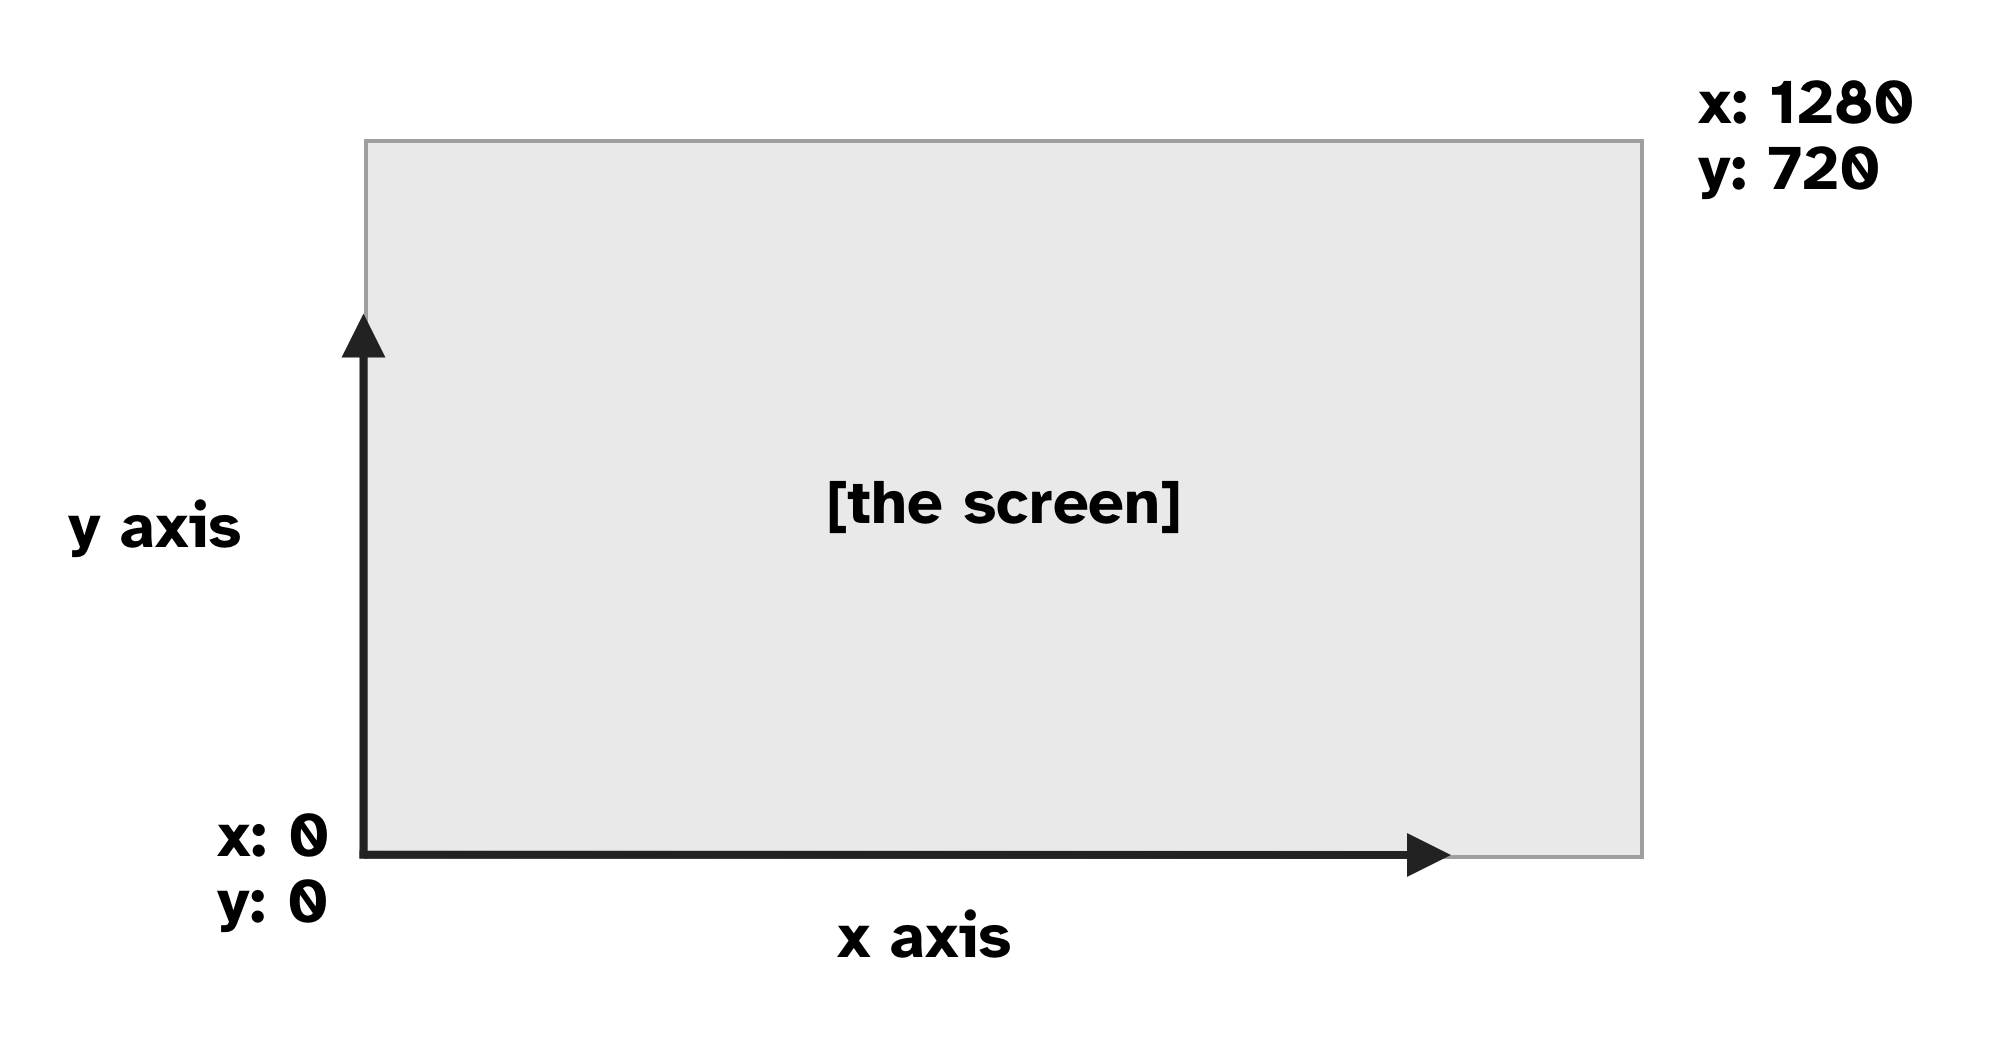 diagram showing x, y axis with 0, 0 being in the bottom left and 1280, 720 being in the upper right